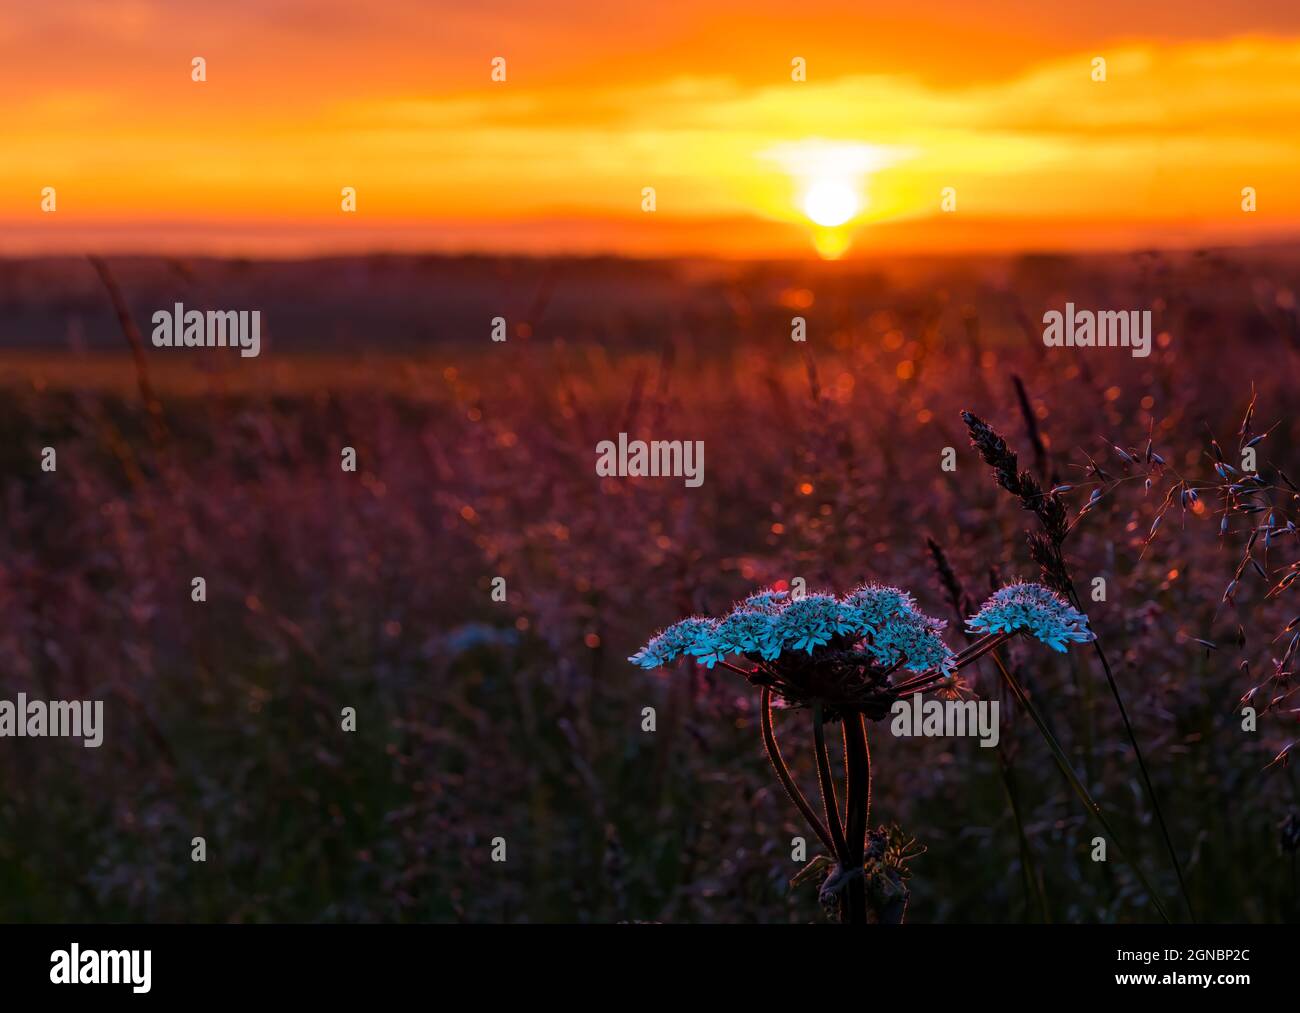 Cloe up of cow parsley in field at sunset with colourful orange sky East Lothian, Scotland, UK Stock Photo